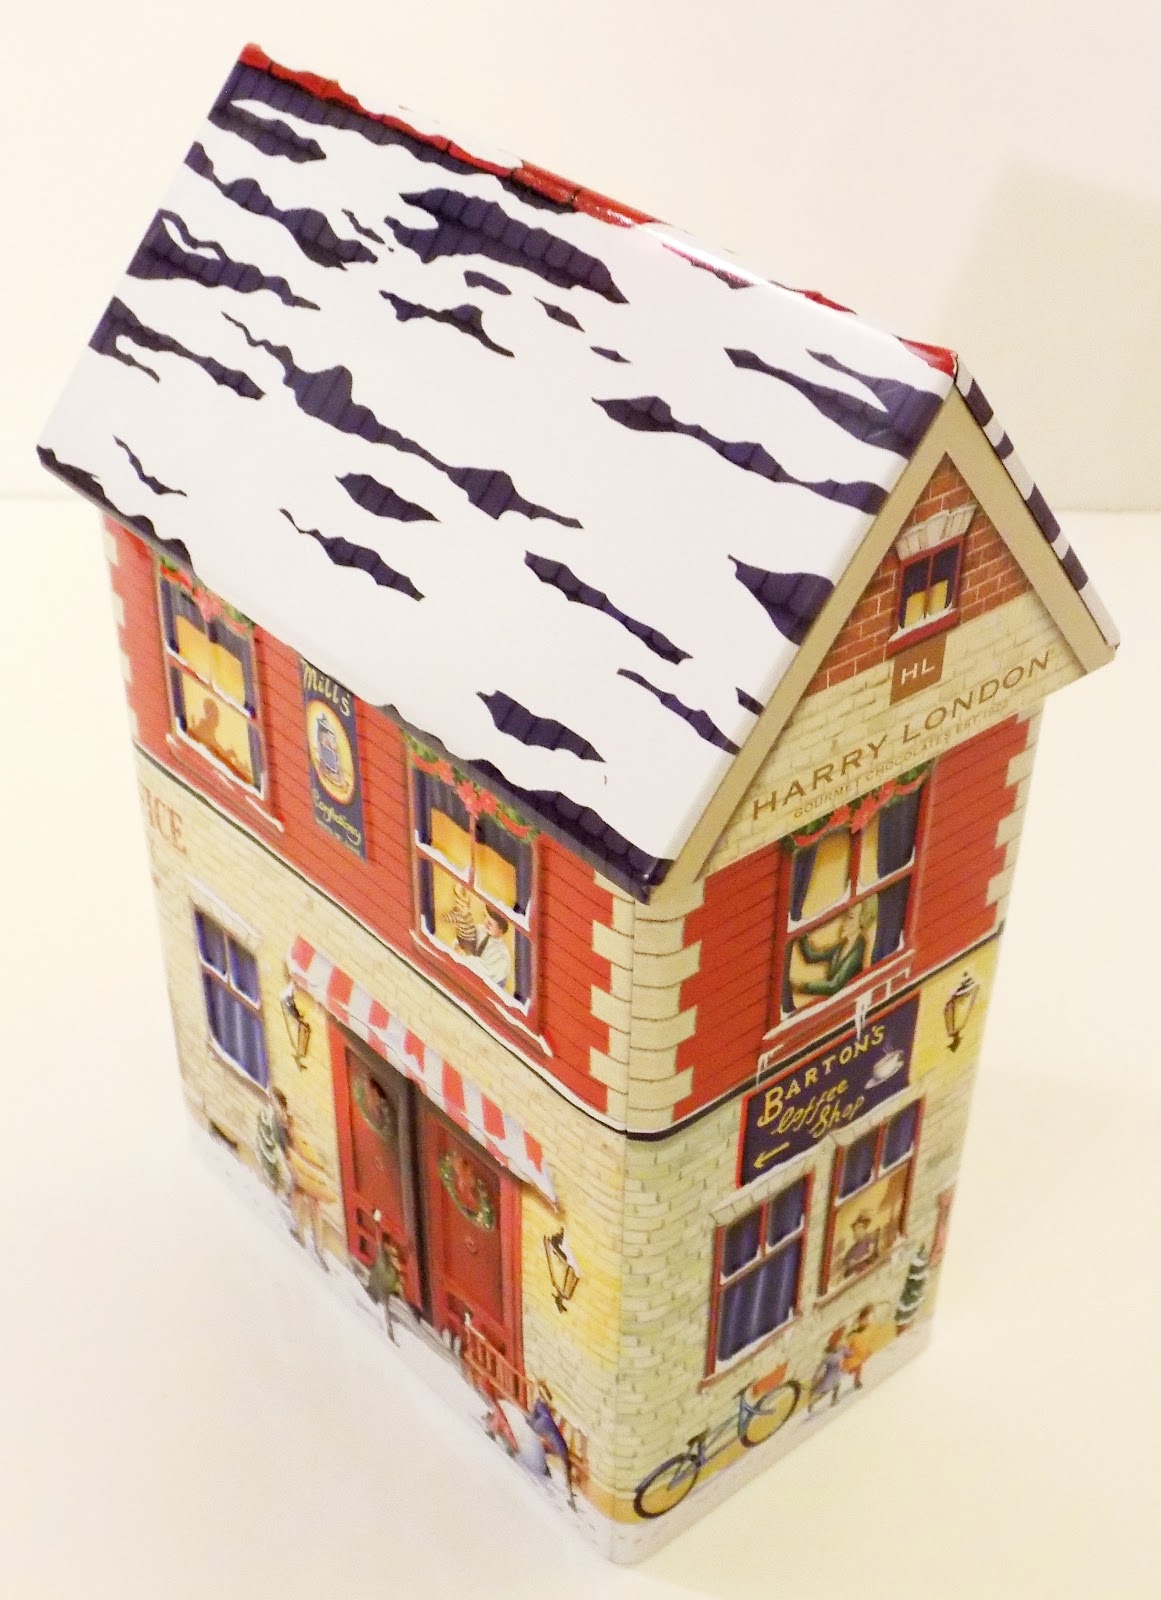 Toys and Stuff: 2016 Harry London Christmas Candy Tin - Post Office